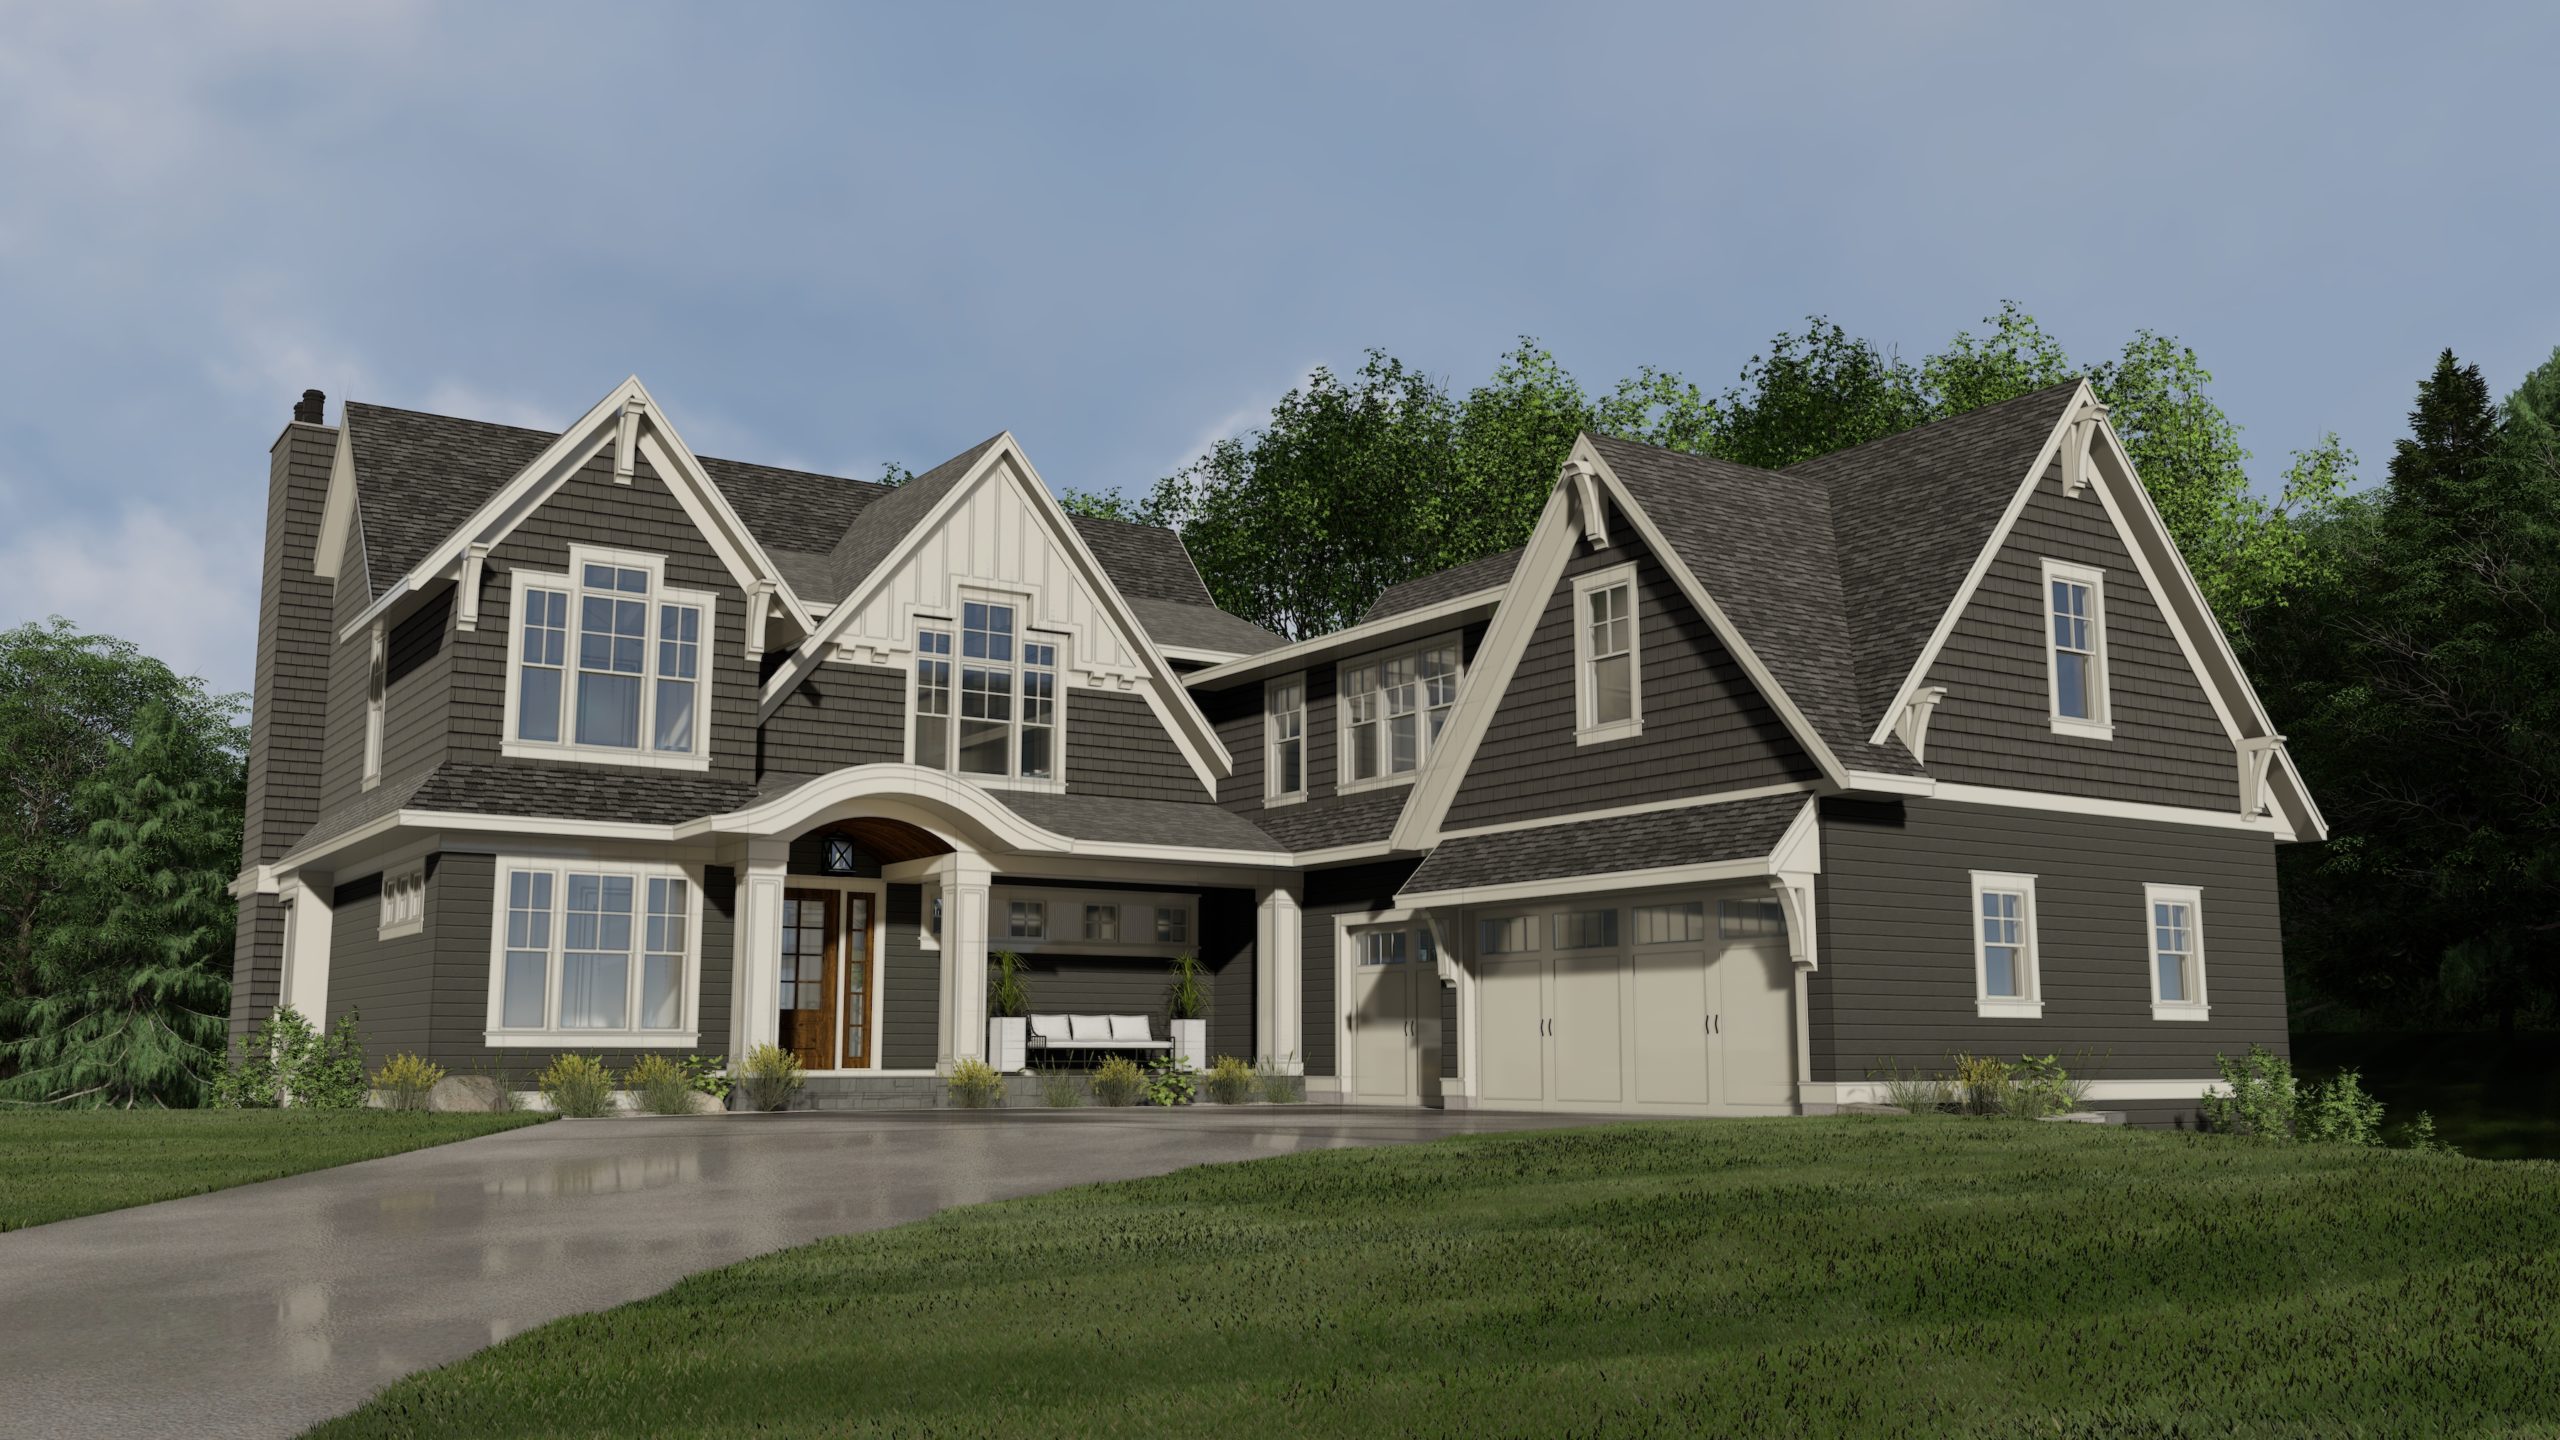 This is a rendering of a house with a garage.